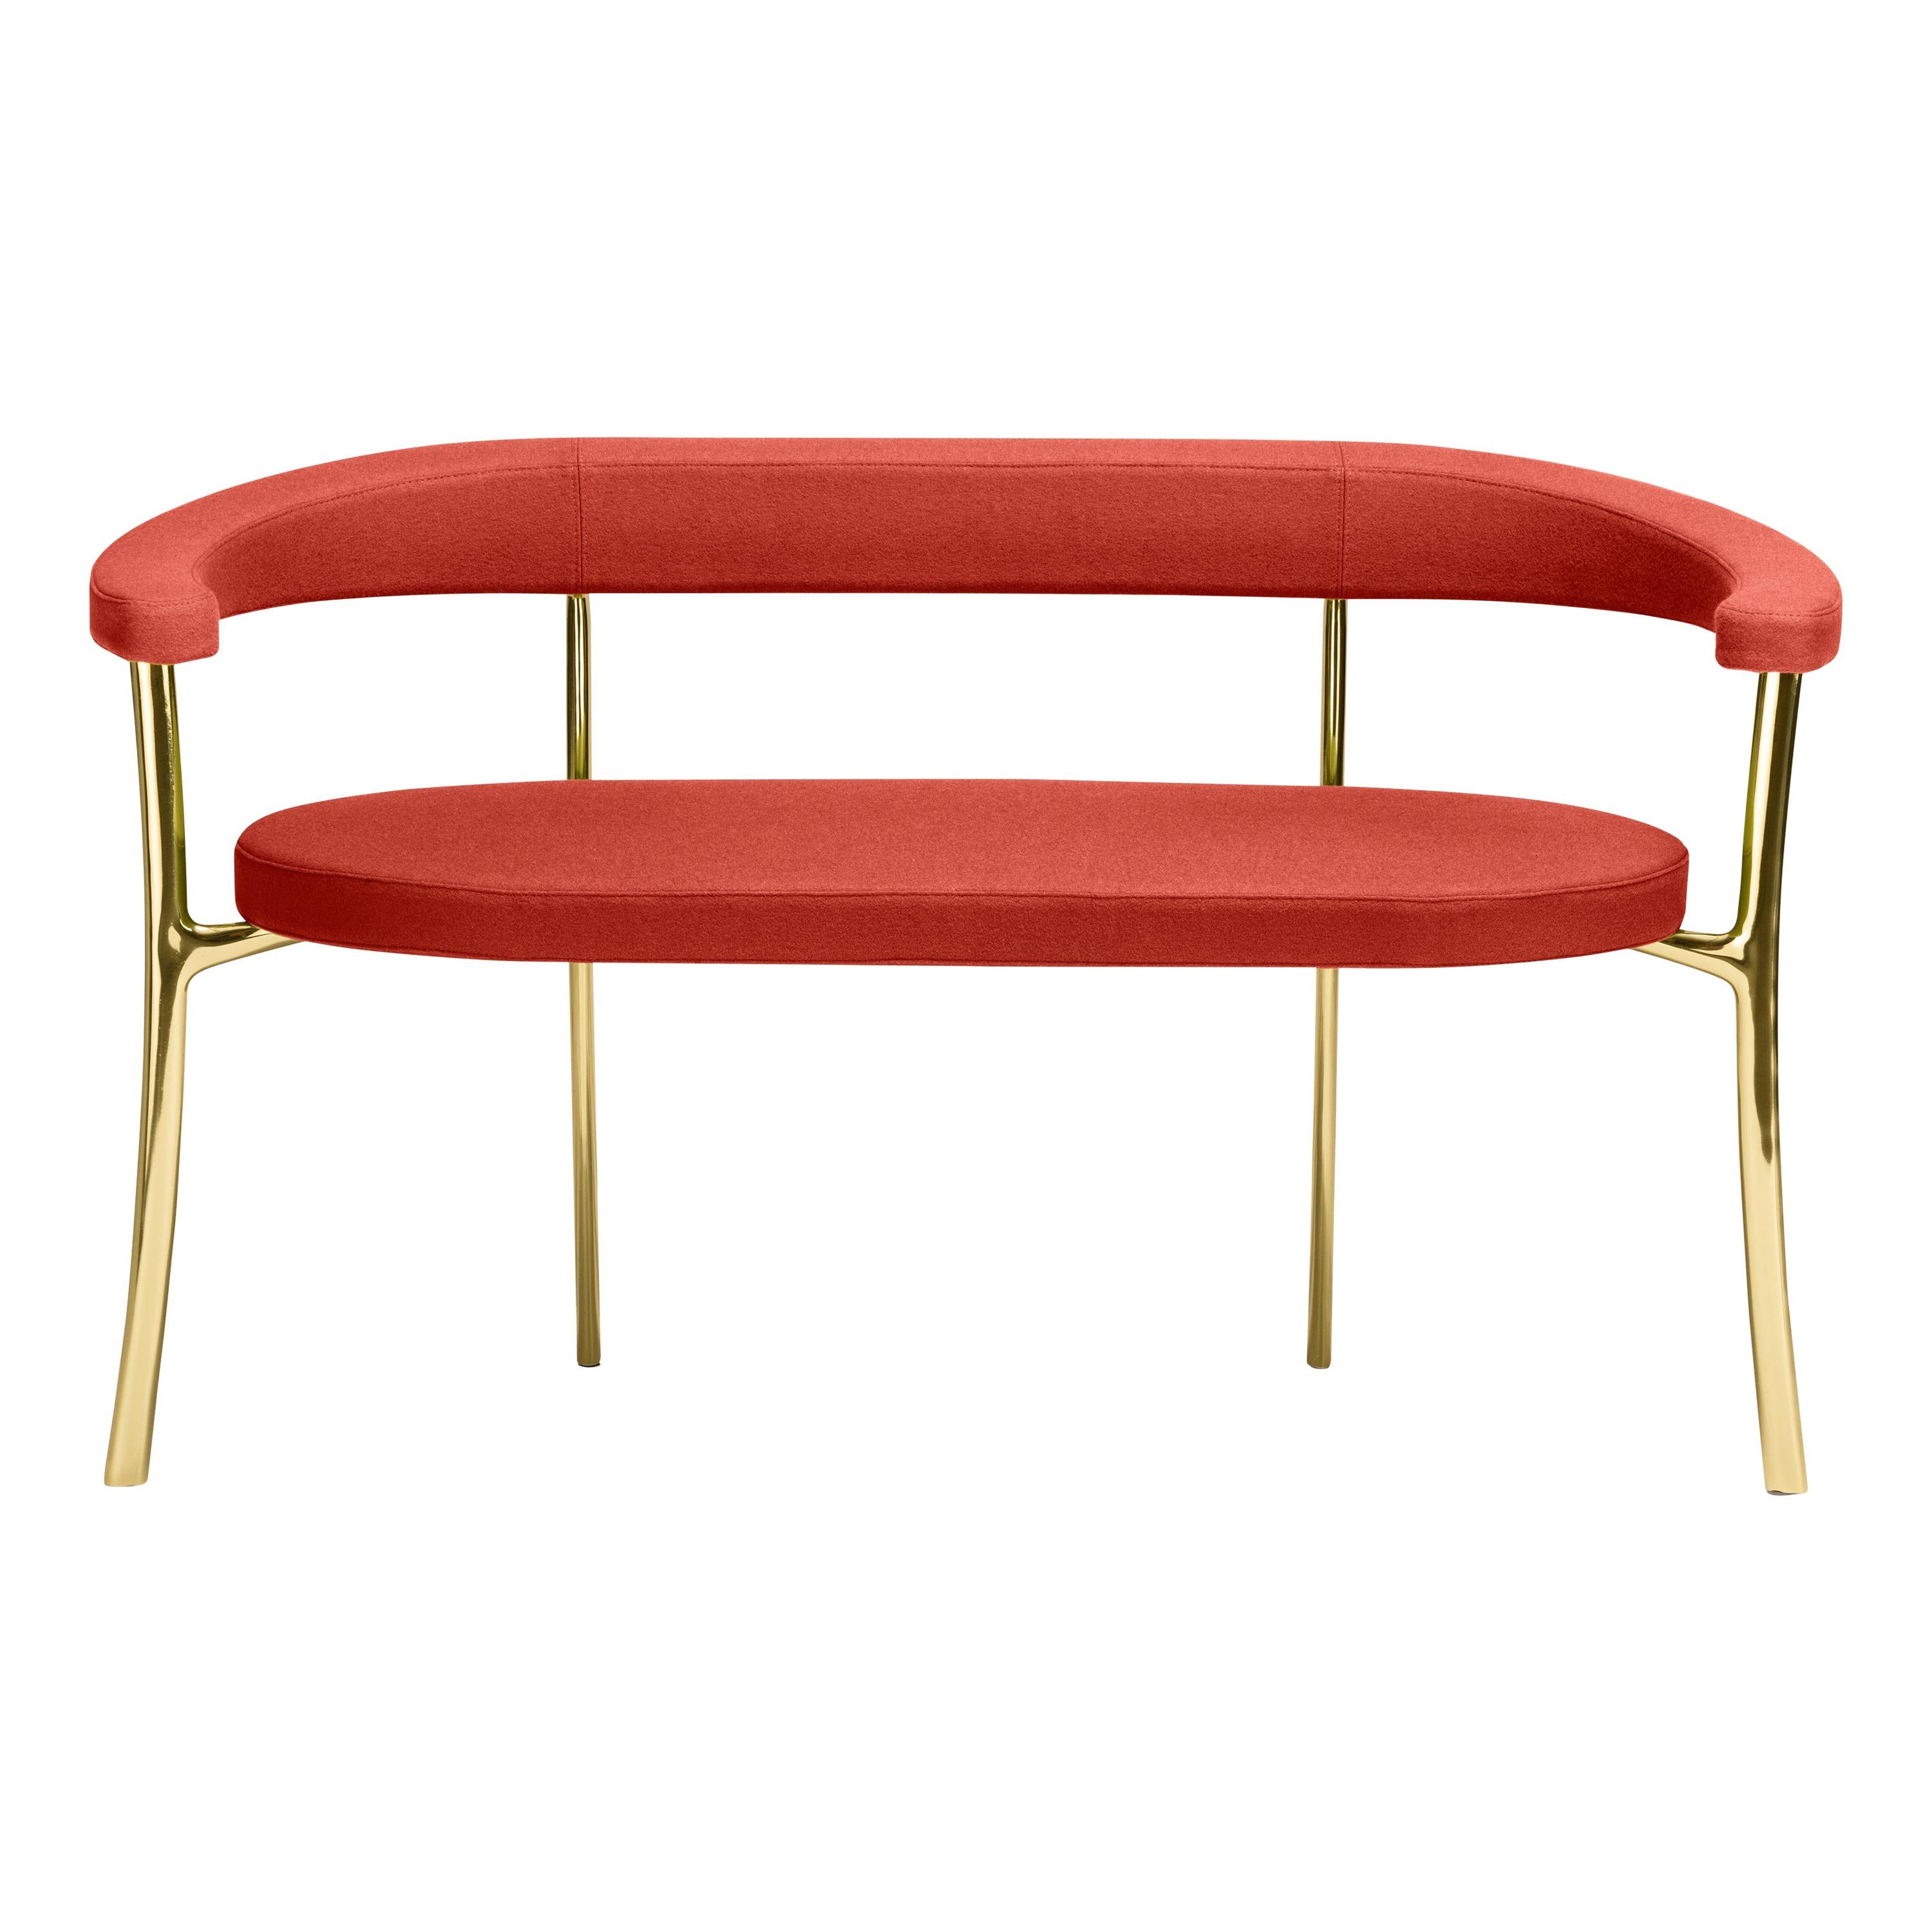 For Sale: Orange (f-1241-c0551) Ghidini1961 Katana bench in Fabric with Polished Brass Legs by Paolo Rizzatto